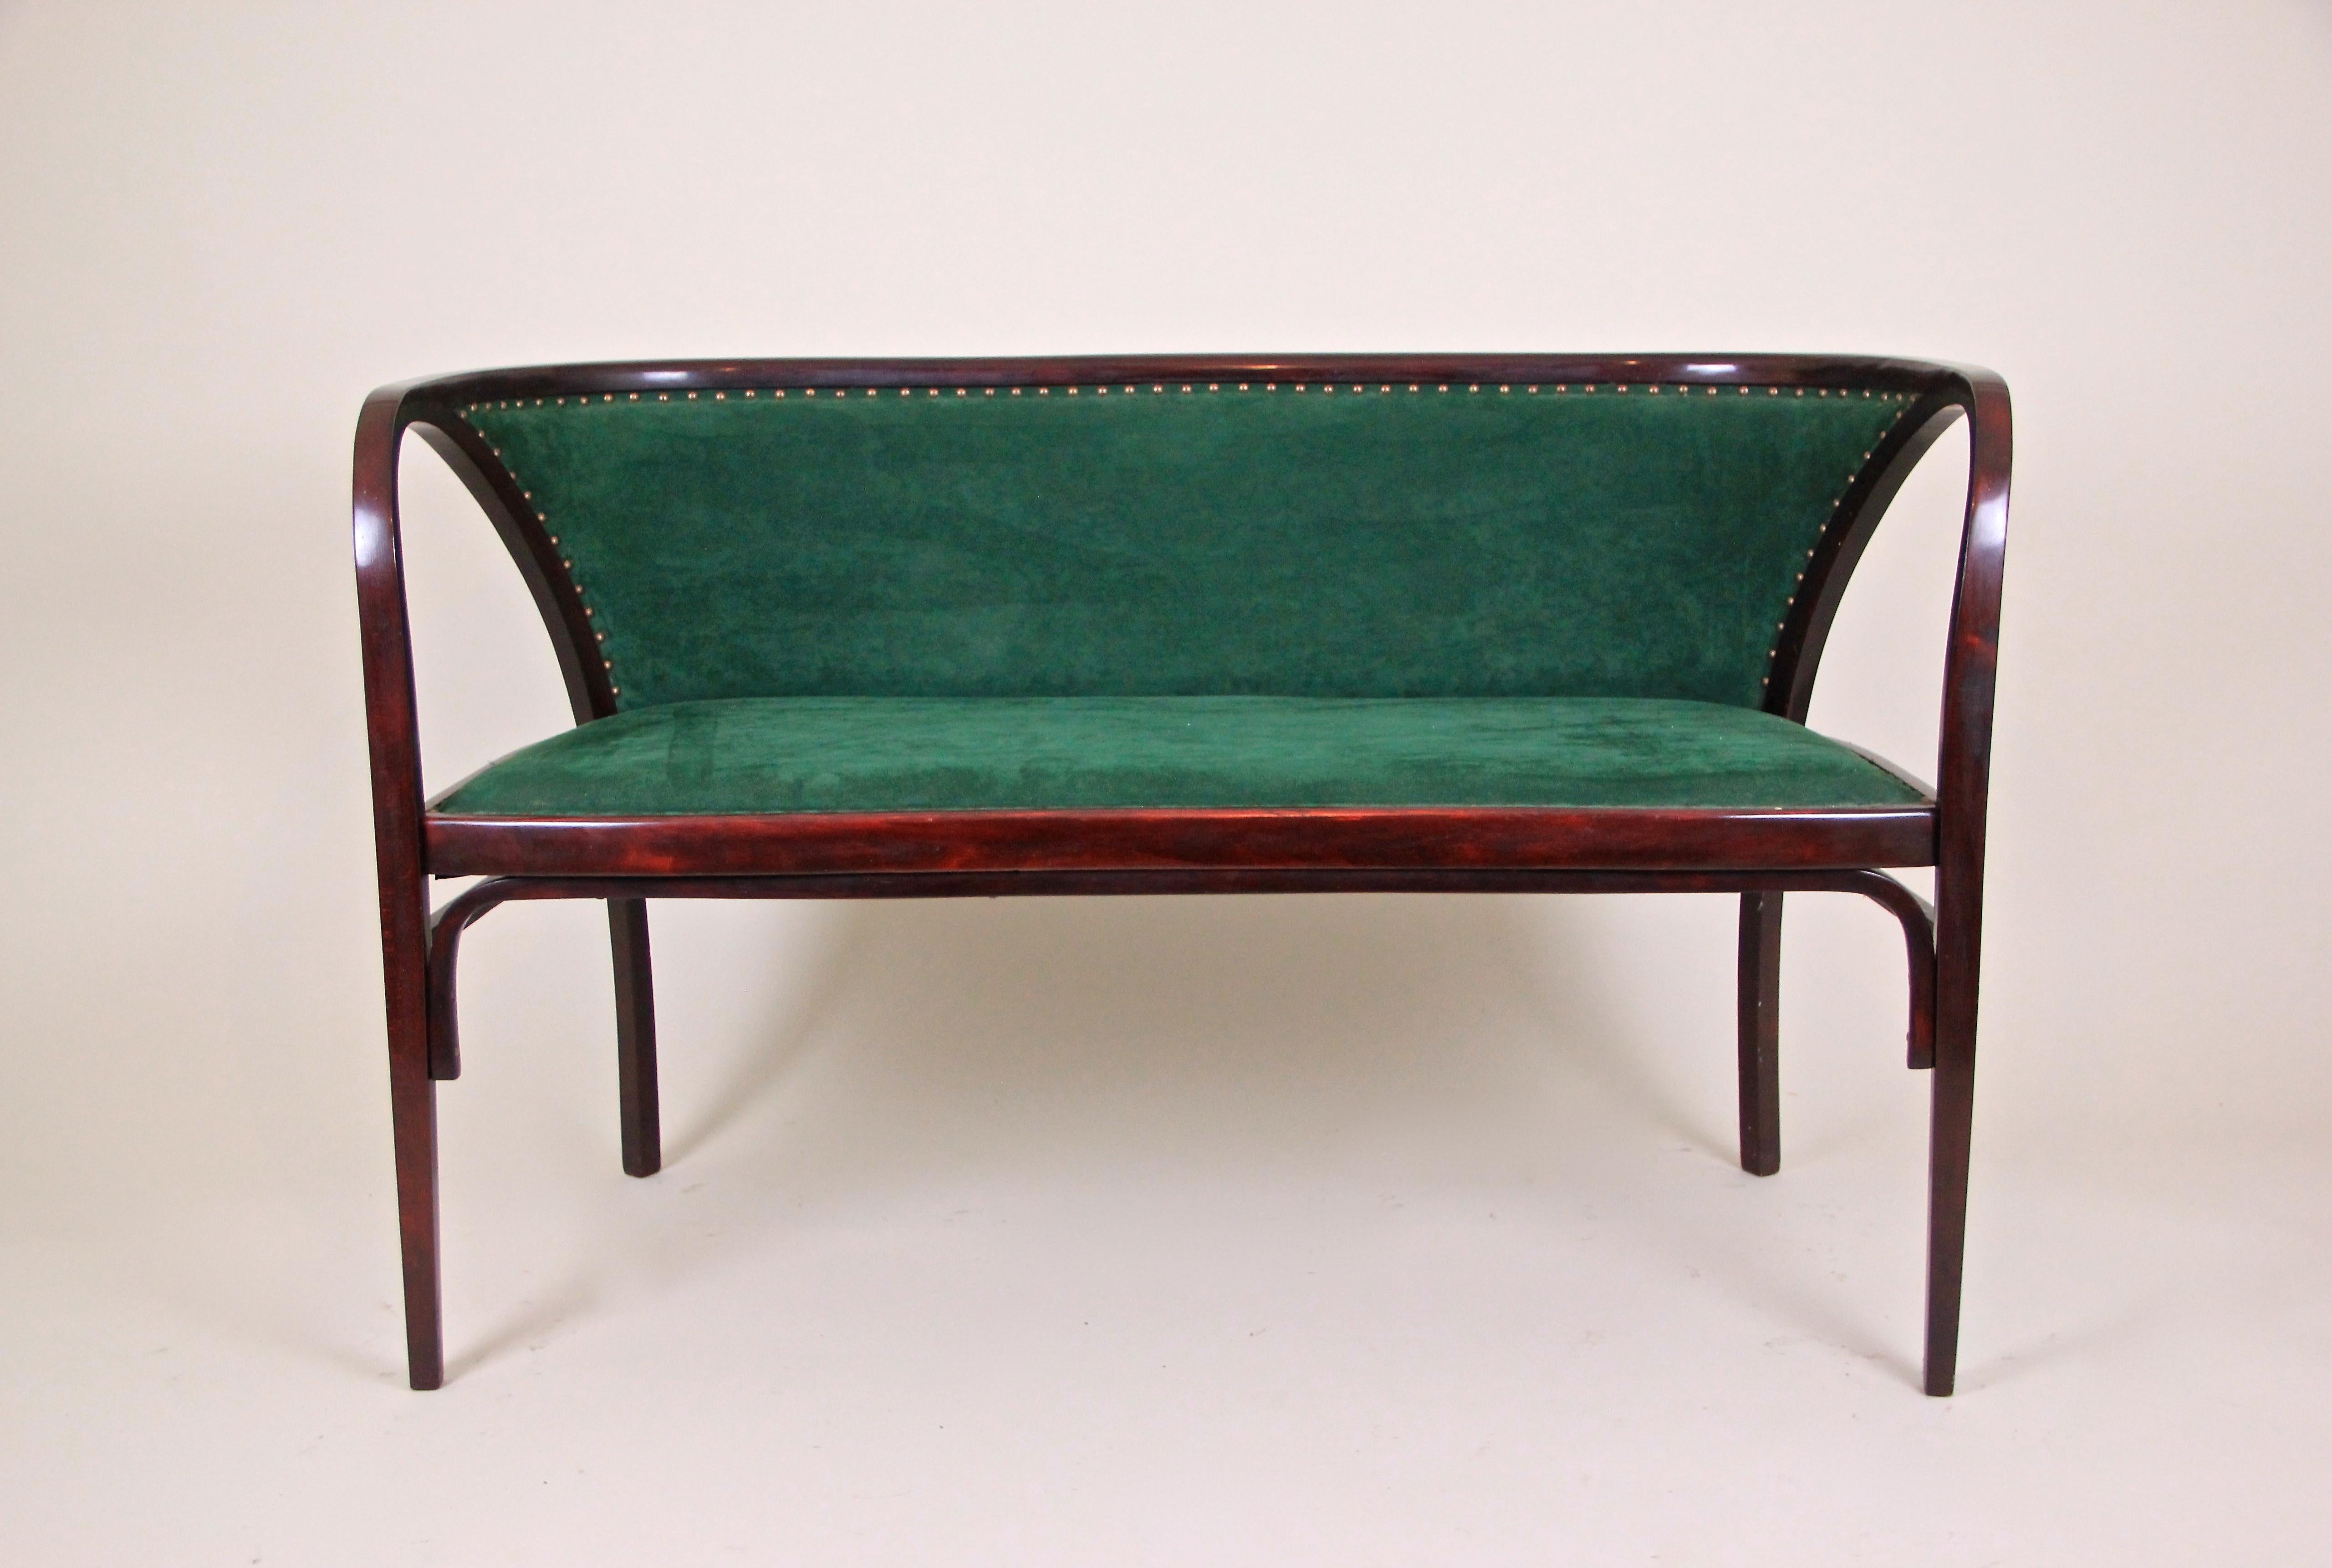 Thonet Bentwood Seating Set/ Salon Suite by M. Kammerer, Austria, circa 1910 For Sale 2